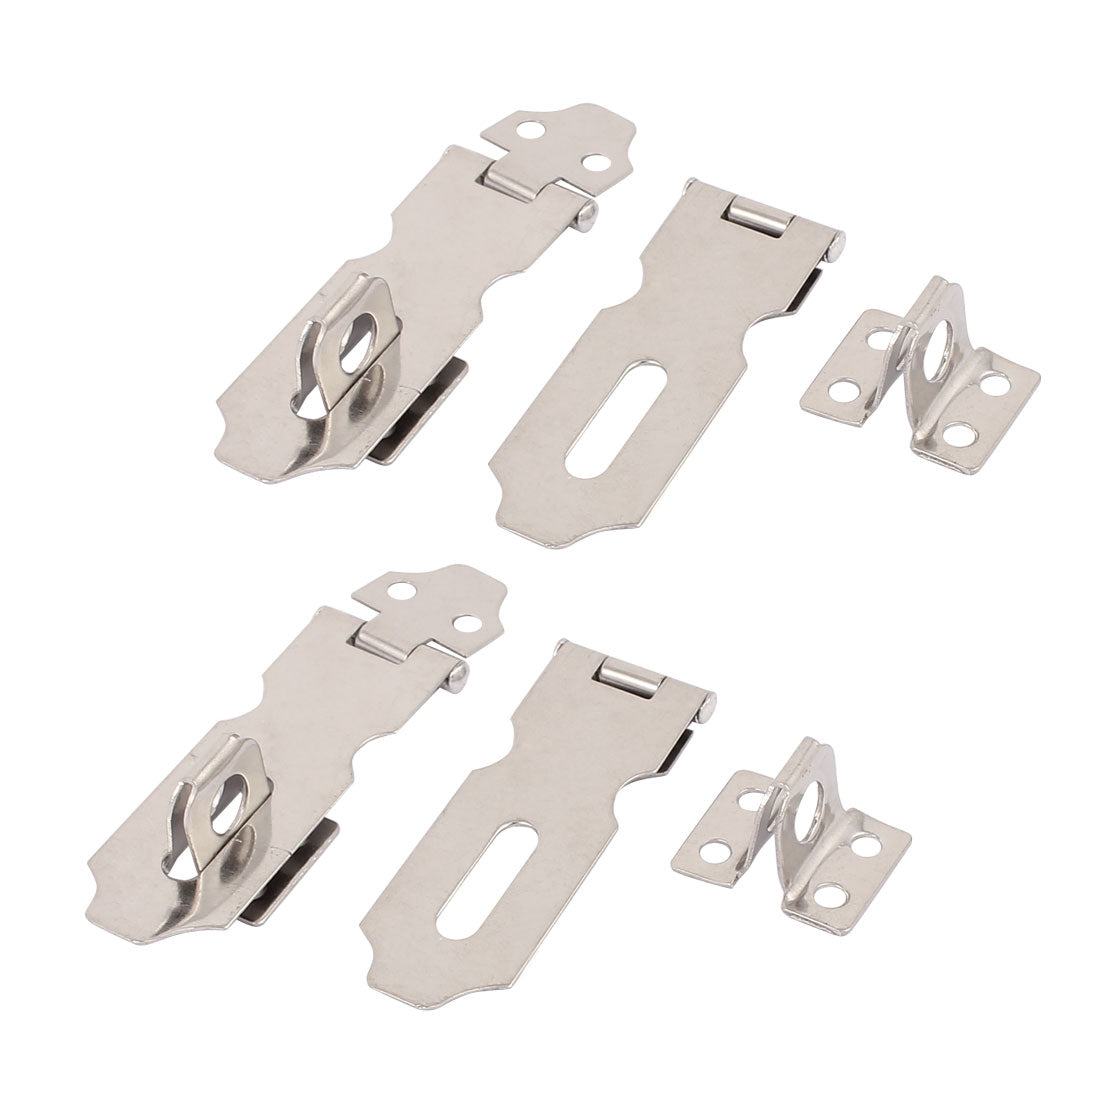 uxcell Uxcell Stainless Steel Security Padlock Latch Door Hasp Staple Silver Tone 4pcs